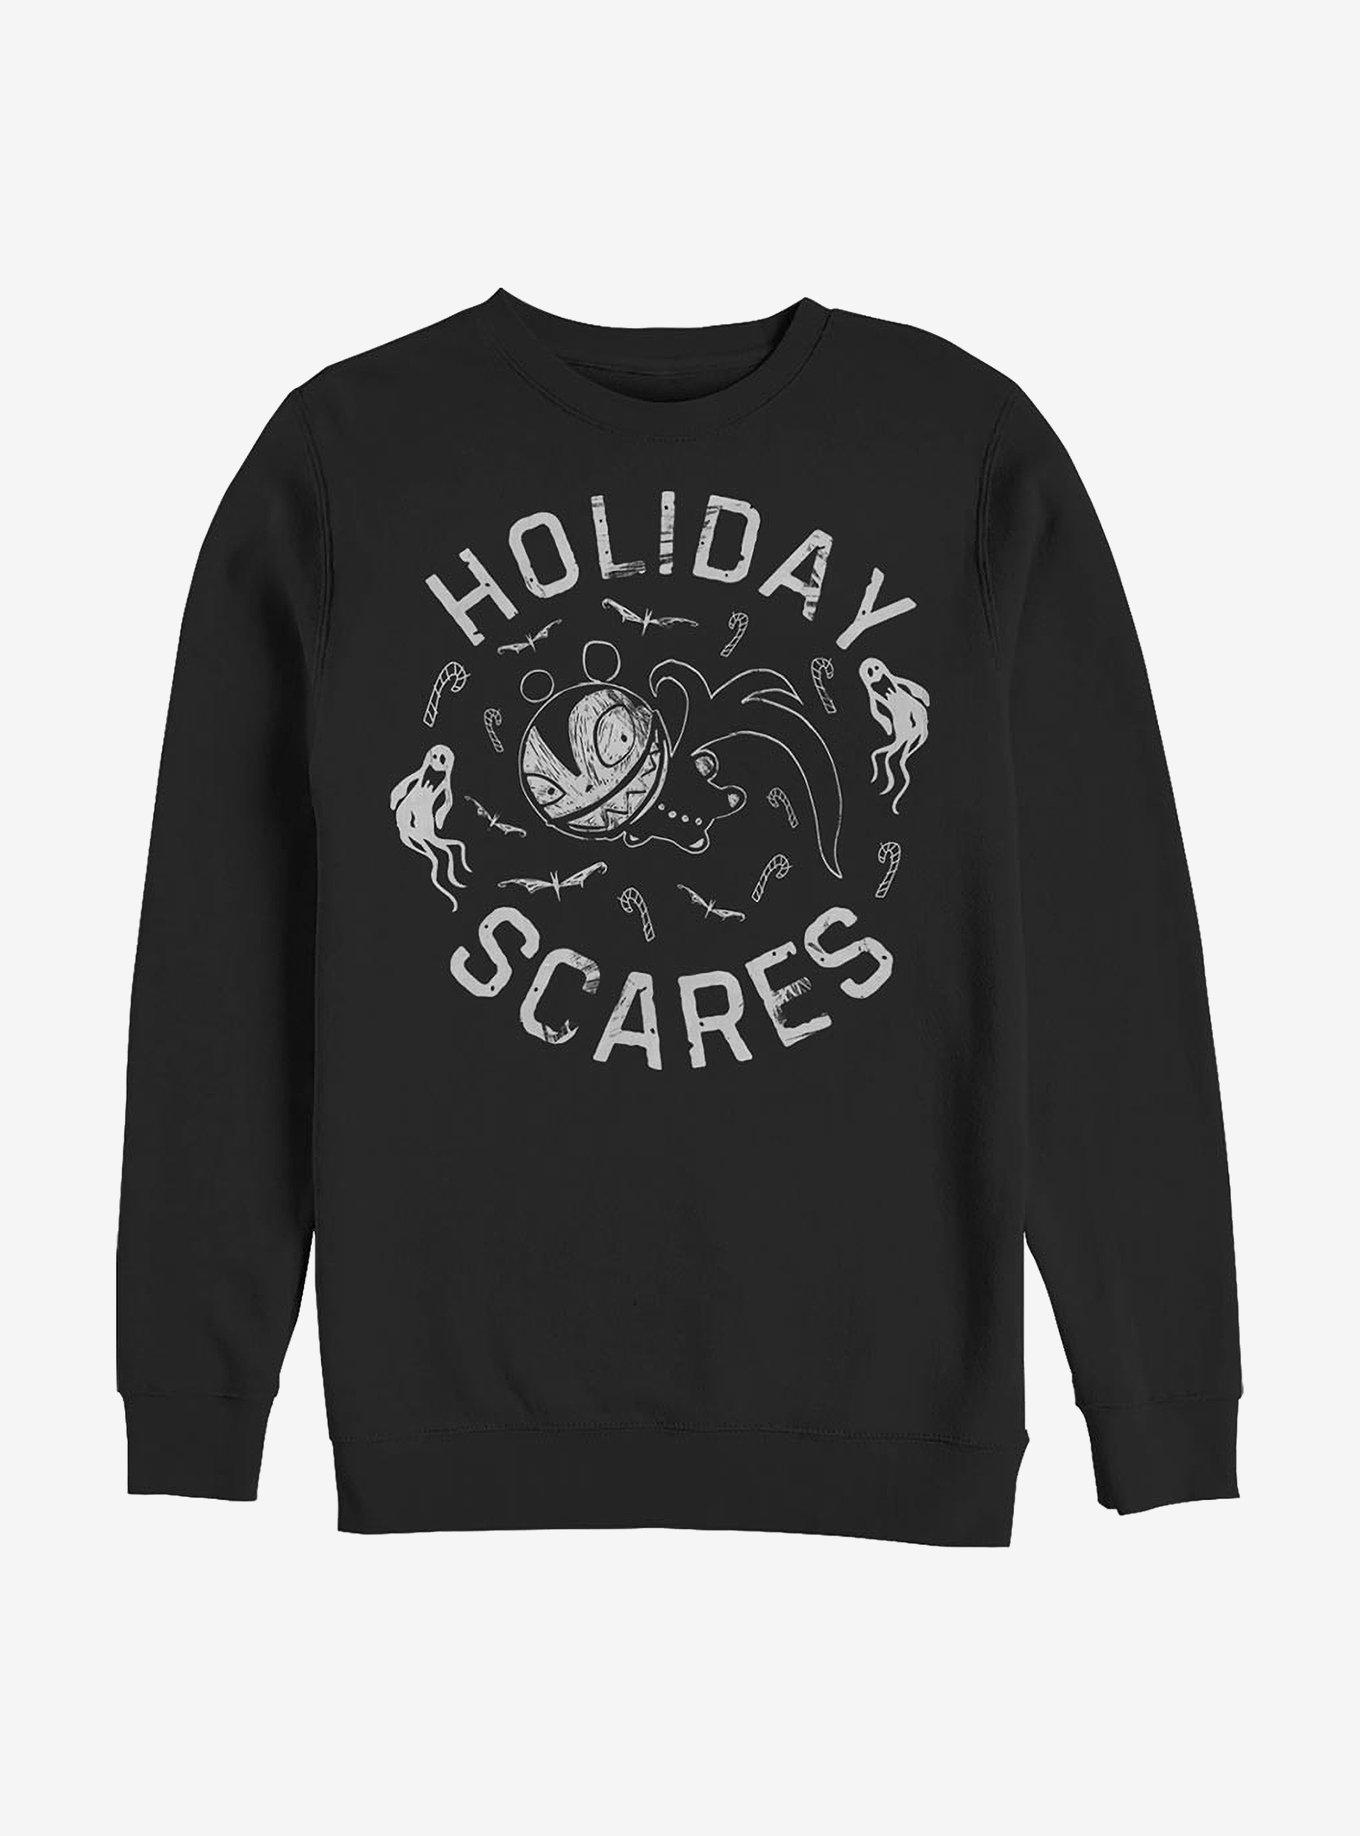 The Nightmare Before Christmas Holiday Scares Doll Sweatshirt, BLACK, hi-res